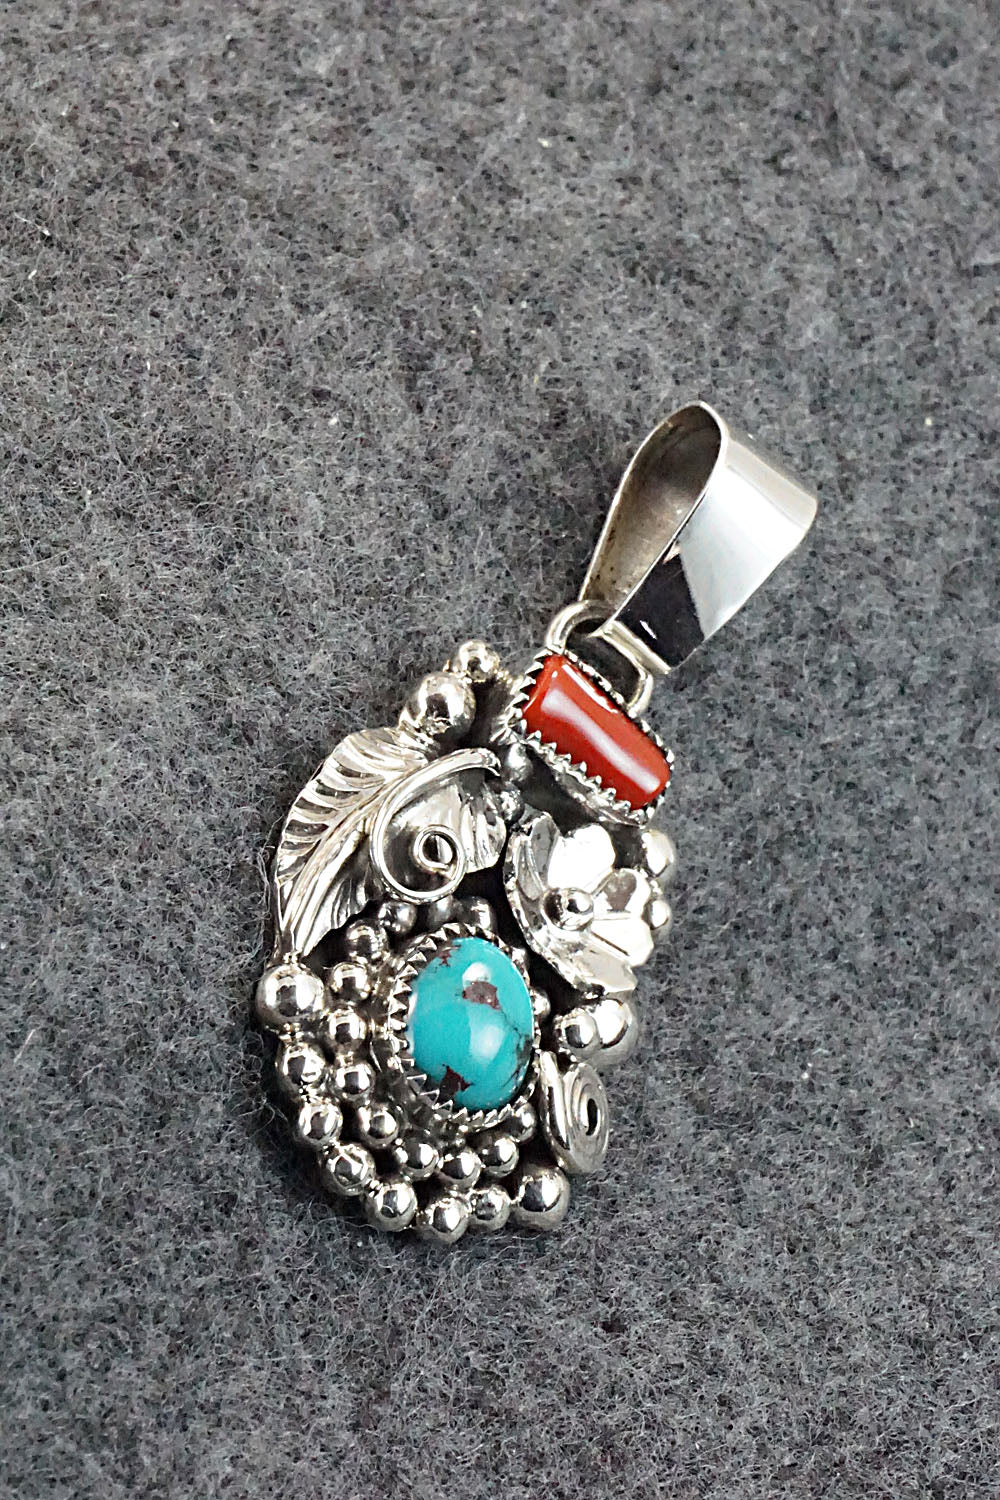 Turquoise, Coral and Sterling Silver Pendant - Sandra Parkett